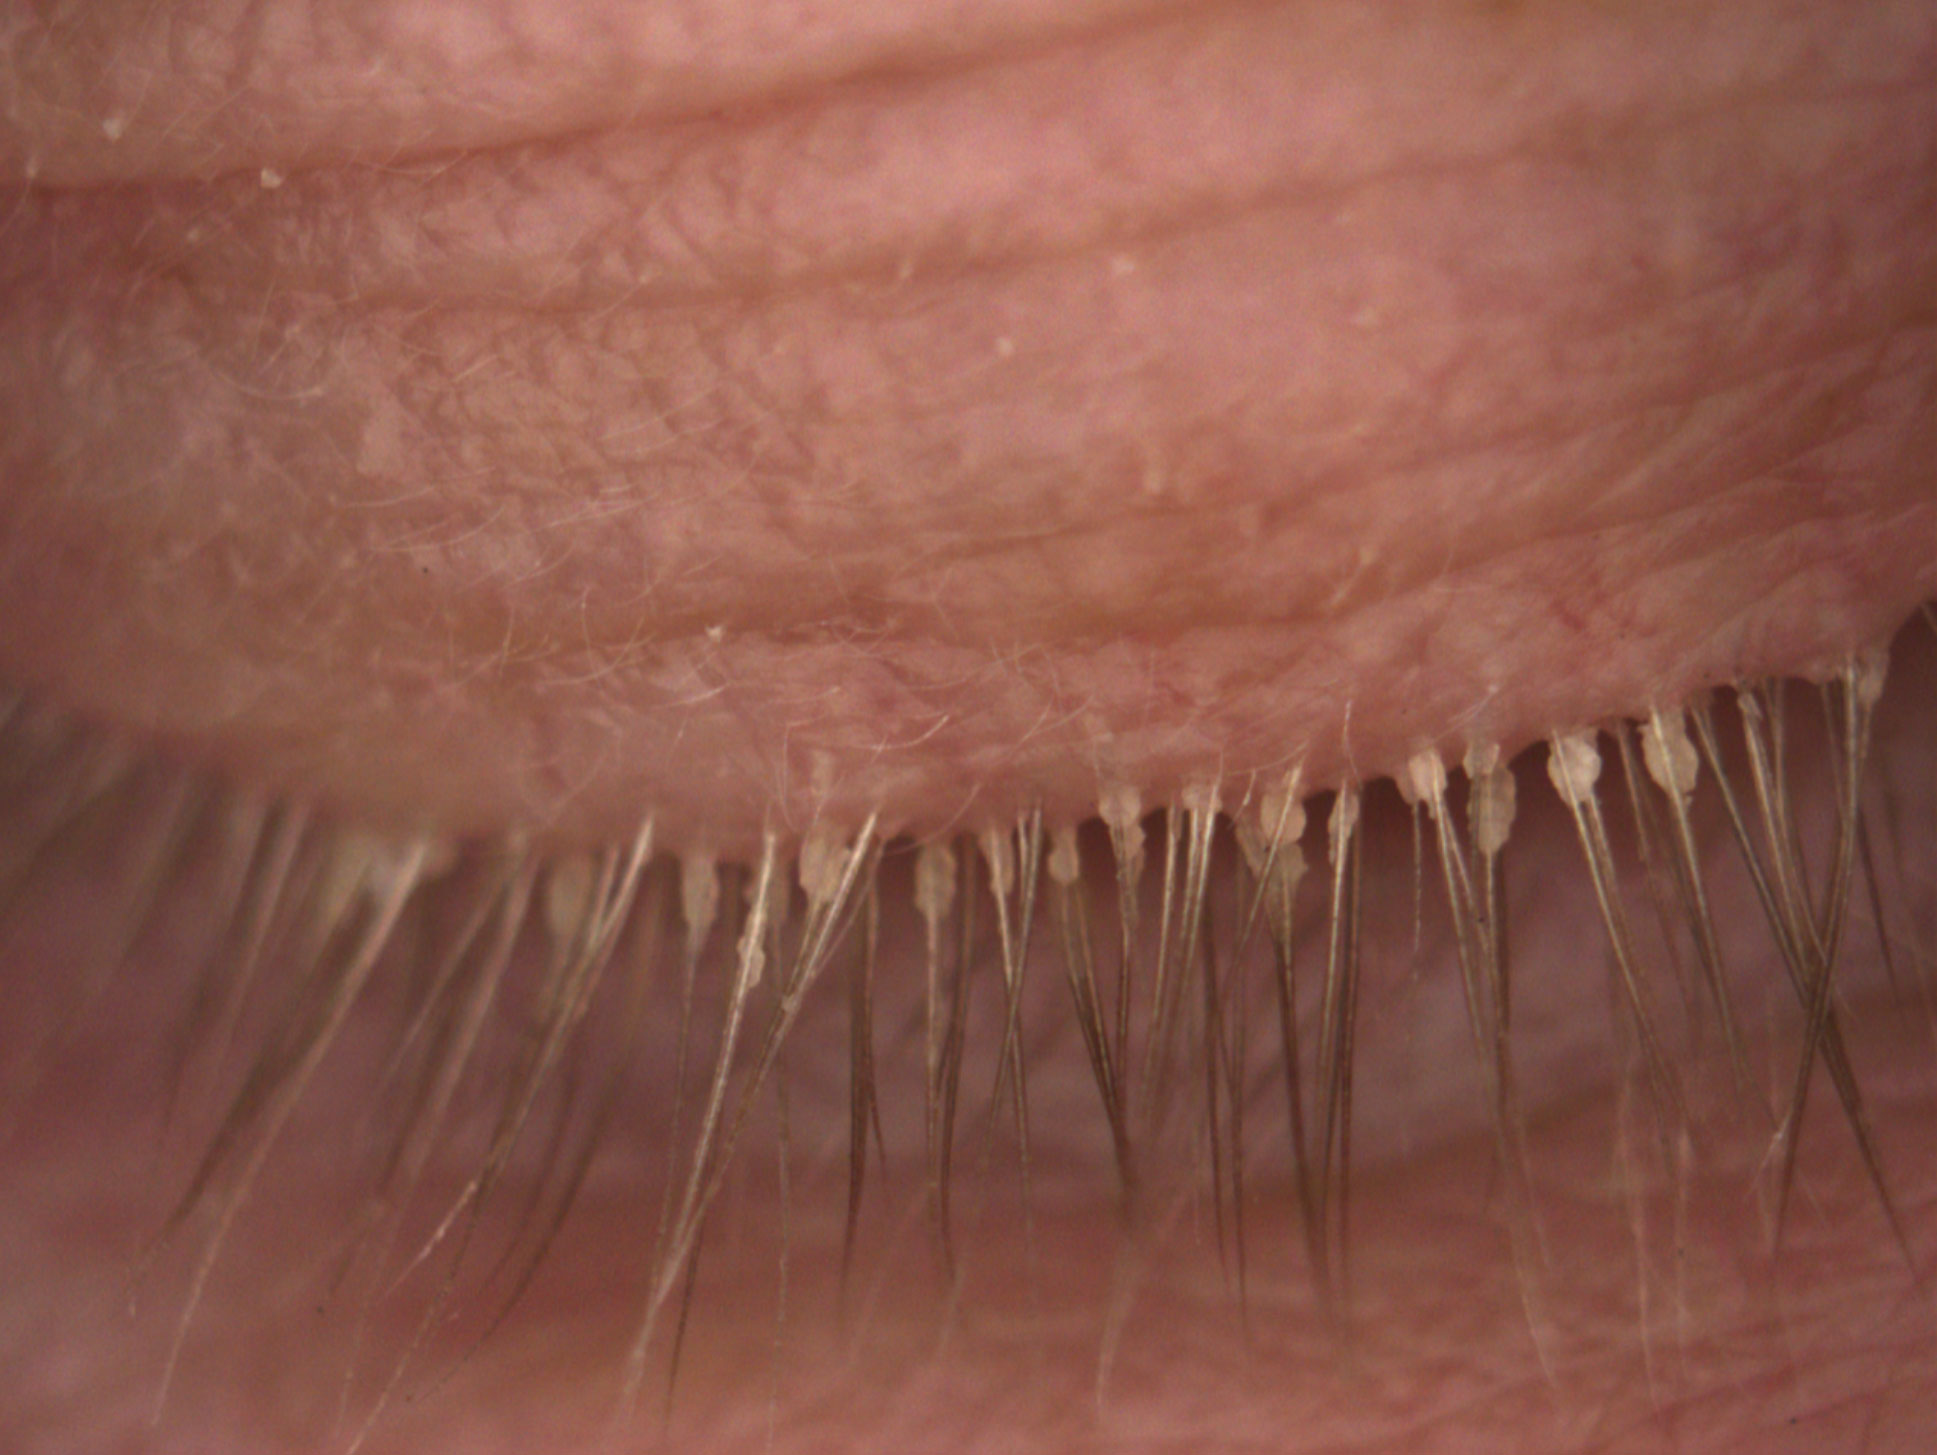 Fig. 2. This patient’s lashes show cylindrical dandruff secondary to the presence of Demodex.